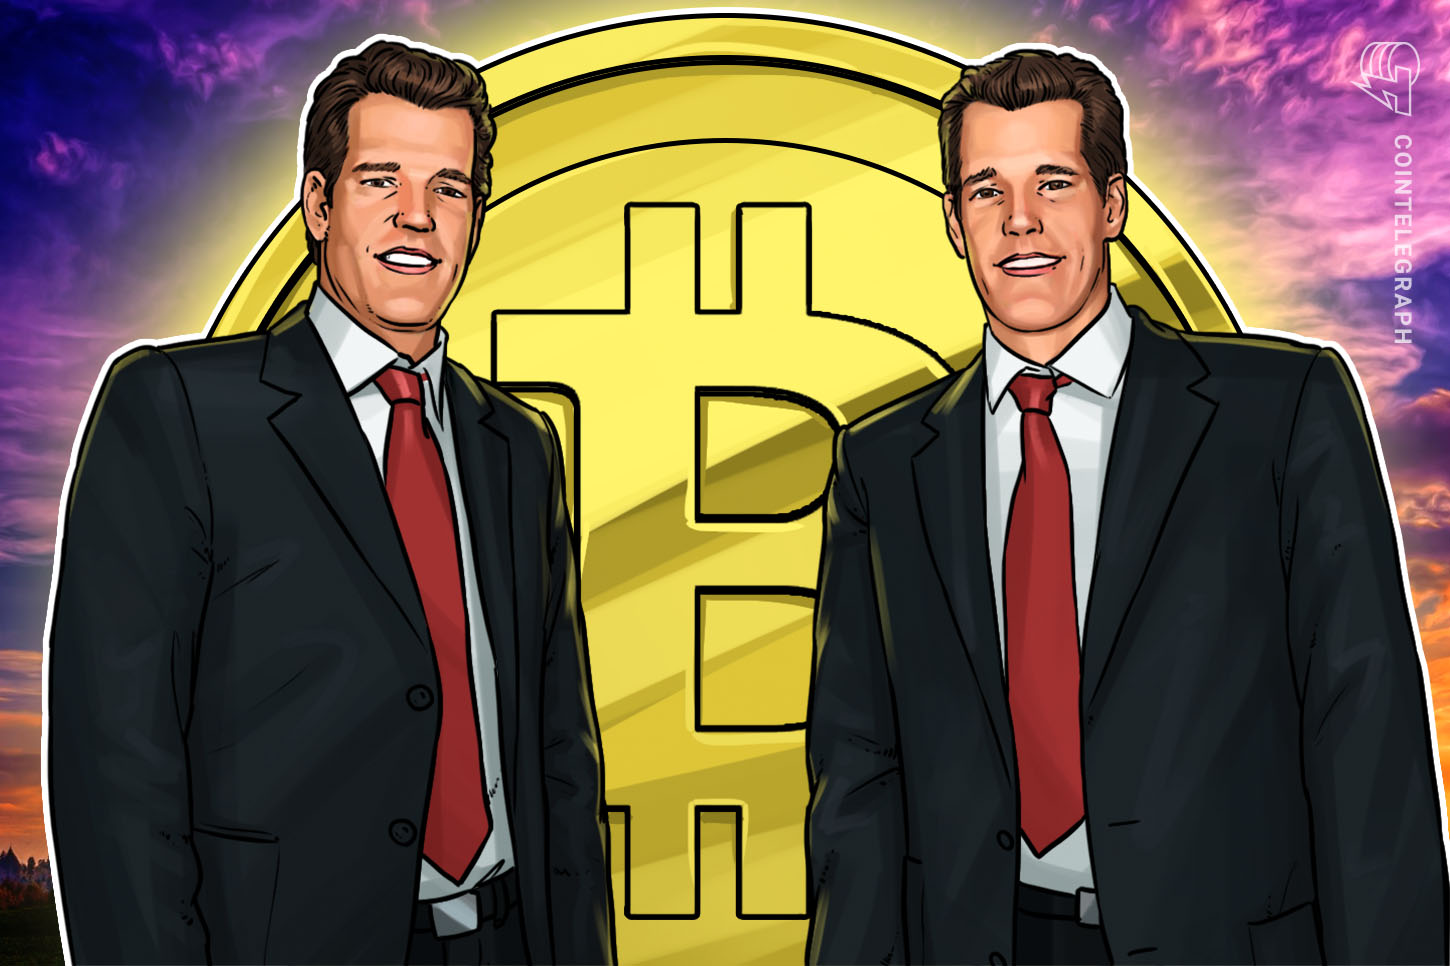 Winklevoss twins refunded for exceeding Bitcoin donation limit to Trump